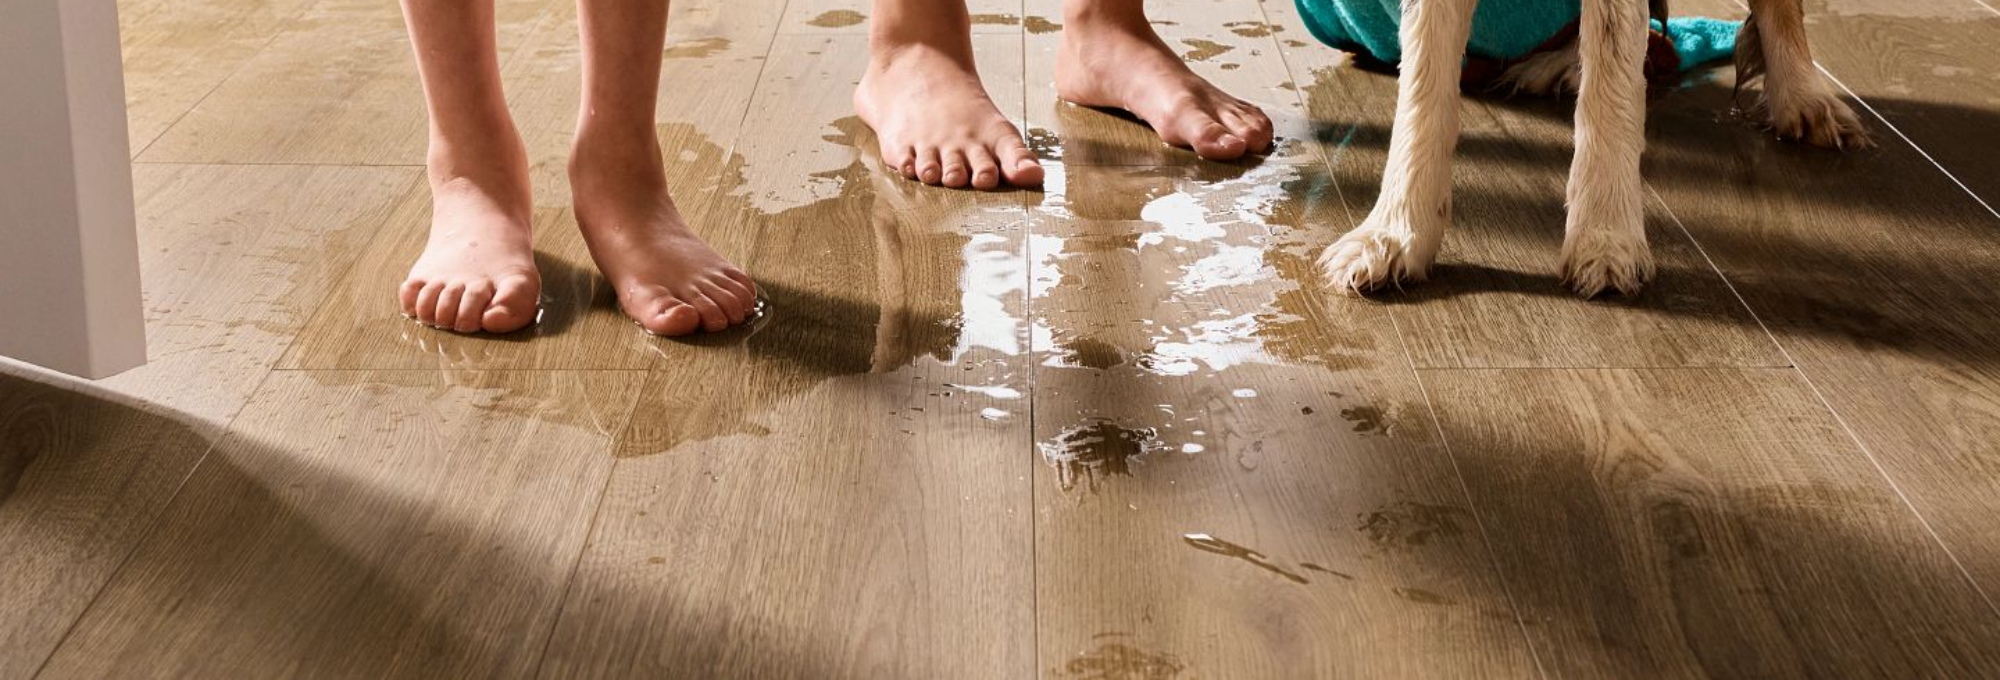 Luxury-Vinyl-Tile-Wet-With-Kids-And-Dog